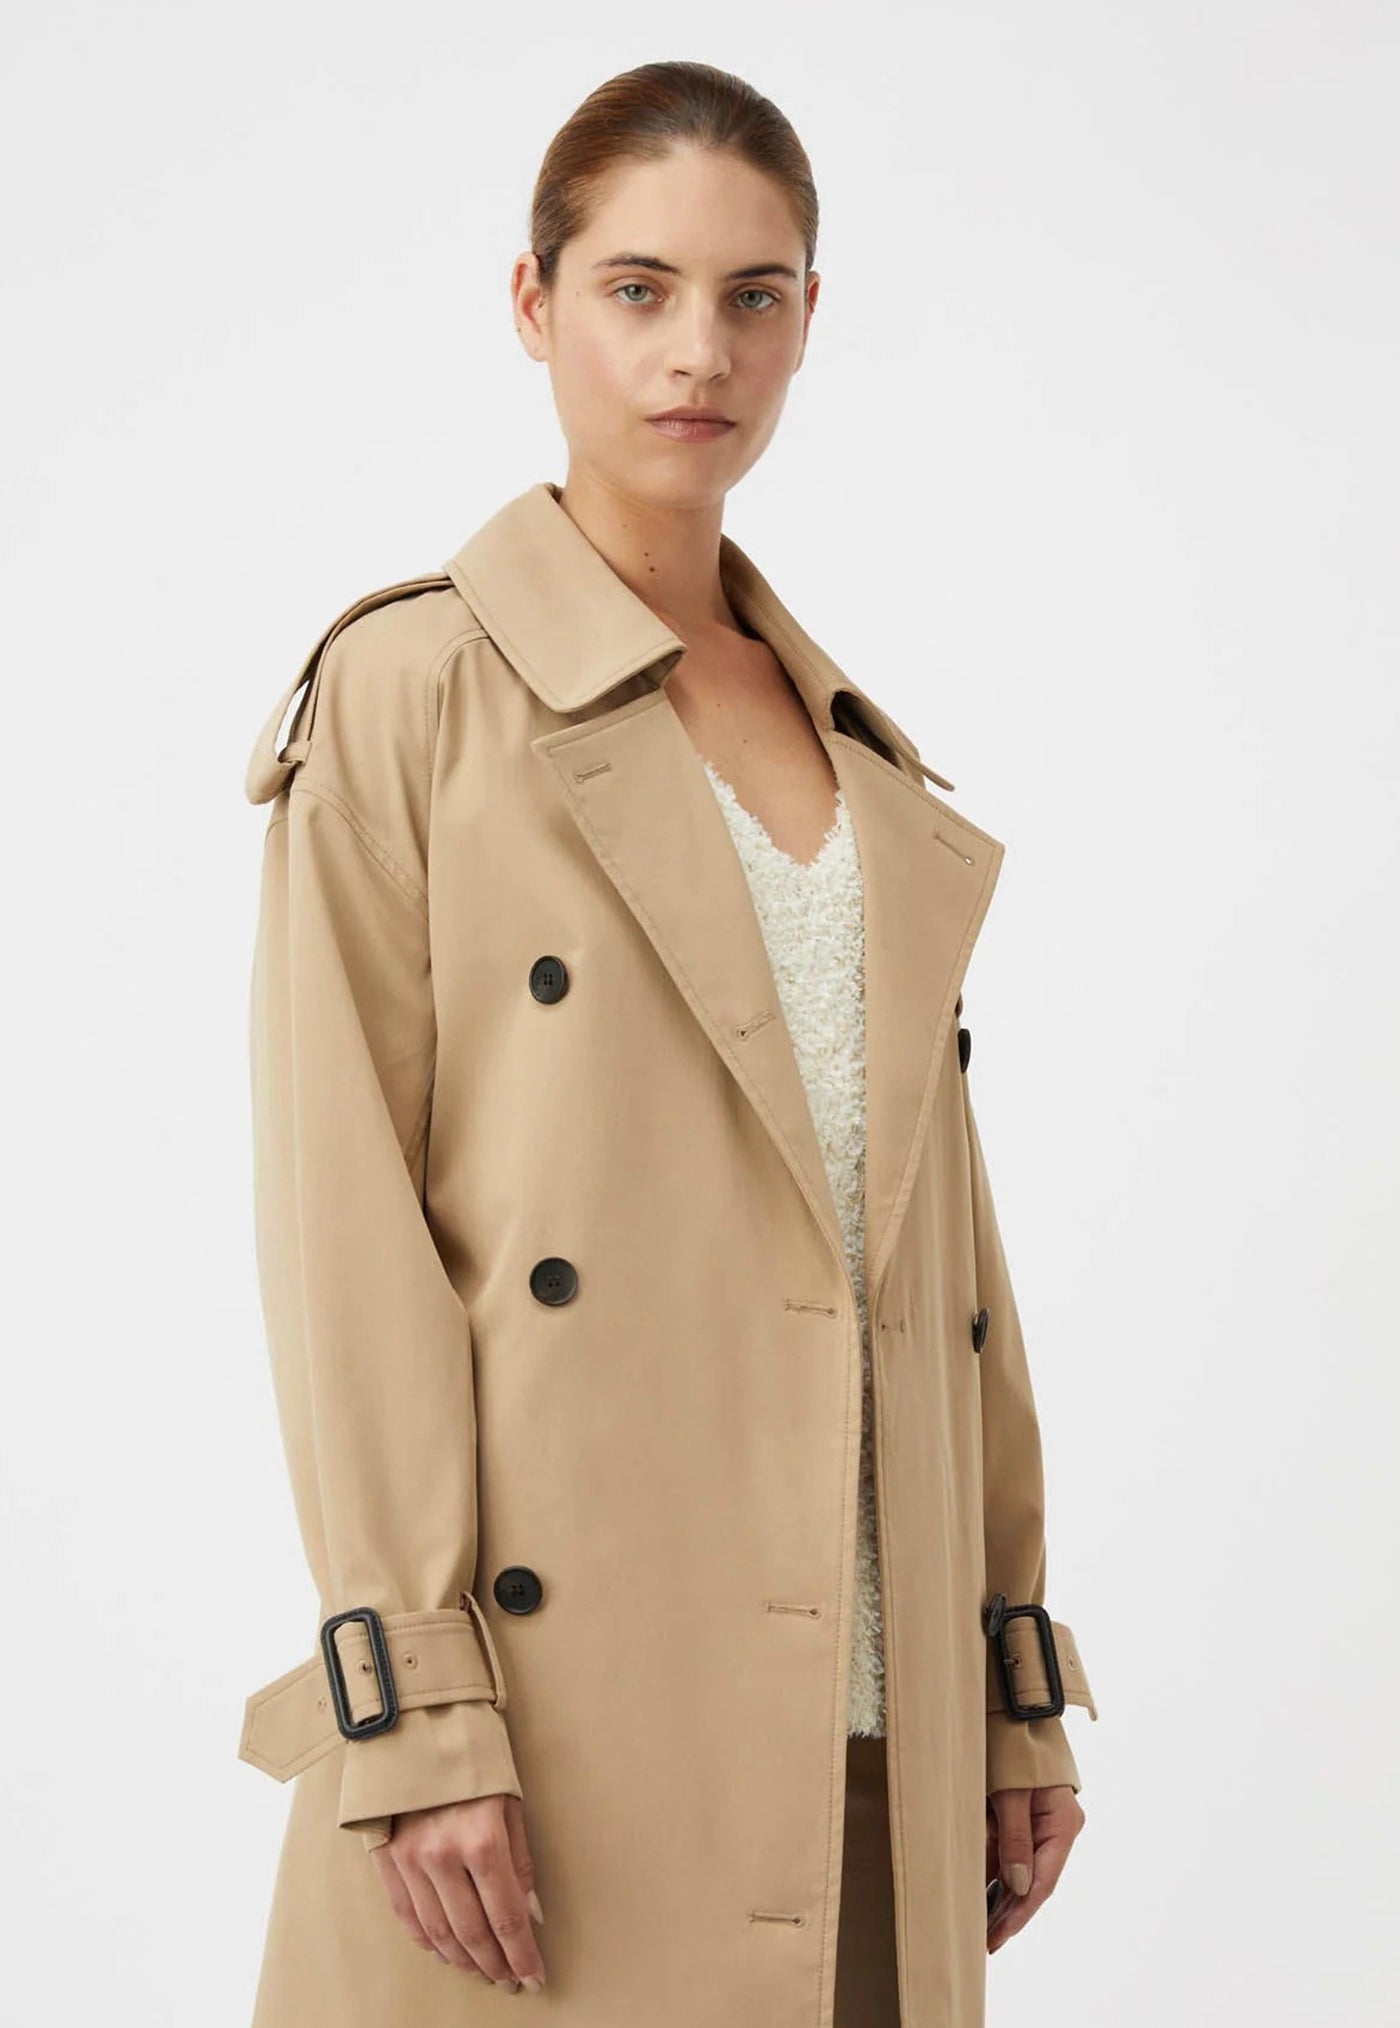 Evans Mid Length Trench Coat - Sand sold by Angel Divine